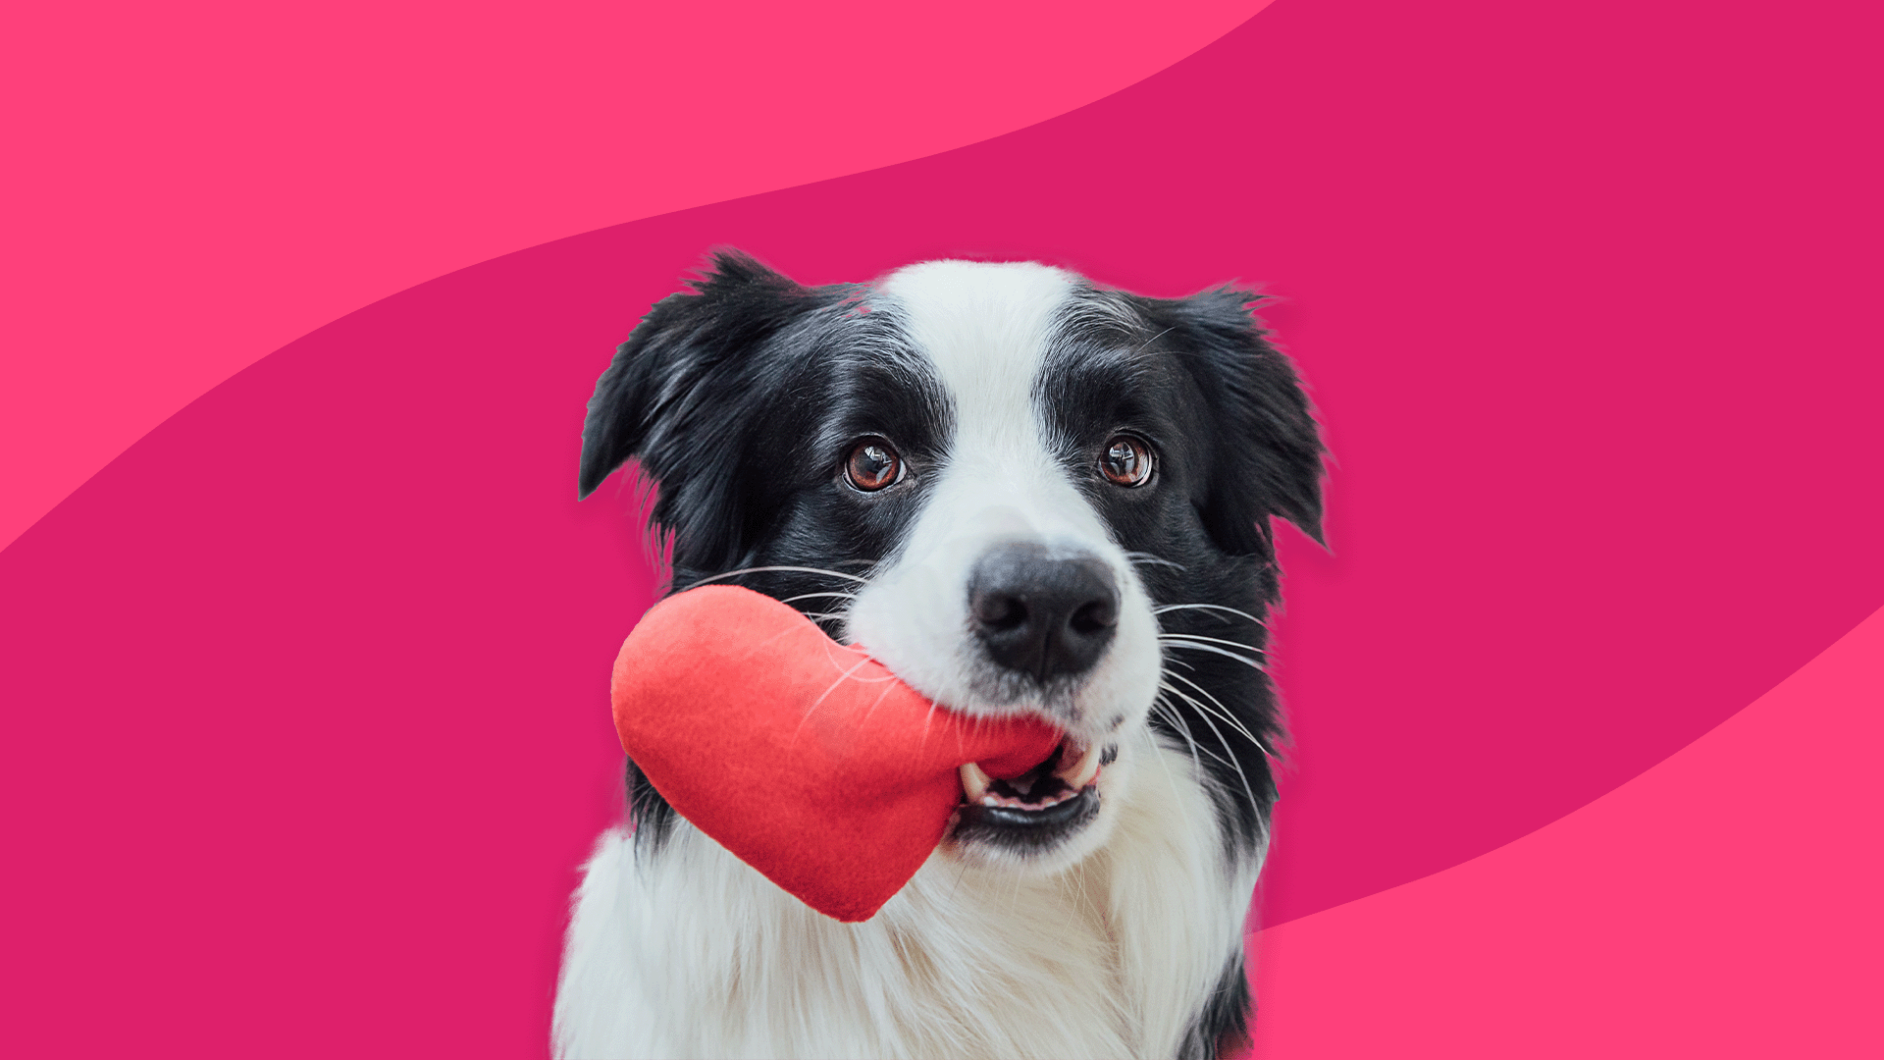 A black and white dog holding a heart shaped toy in their mouth: Furosemide for dogs